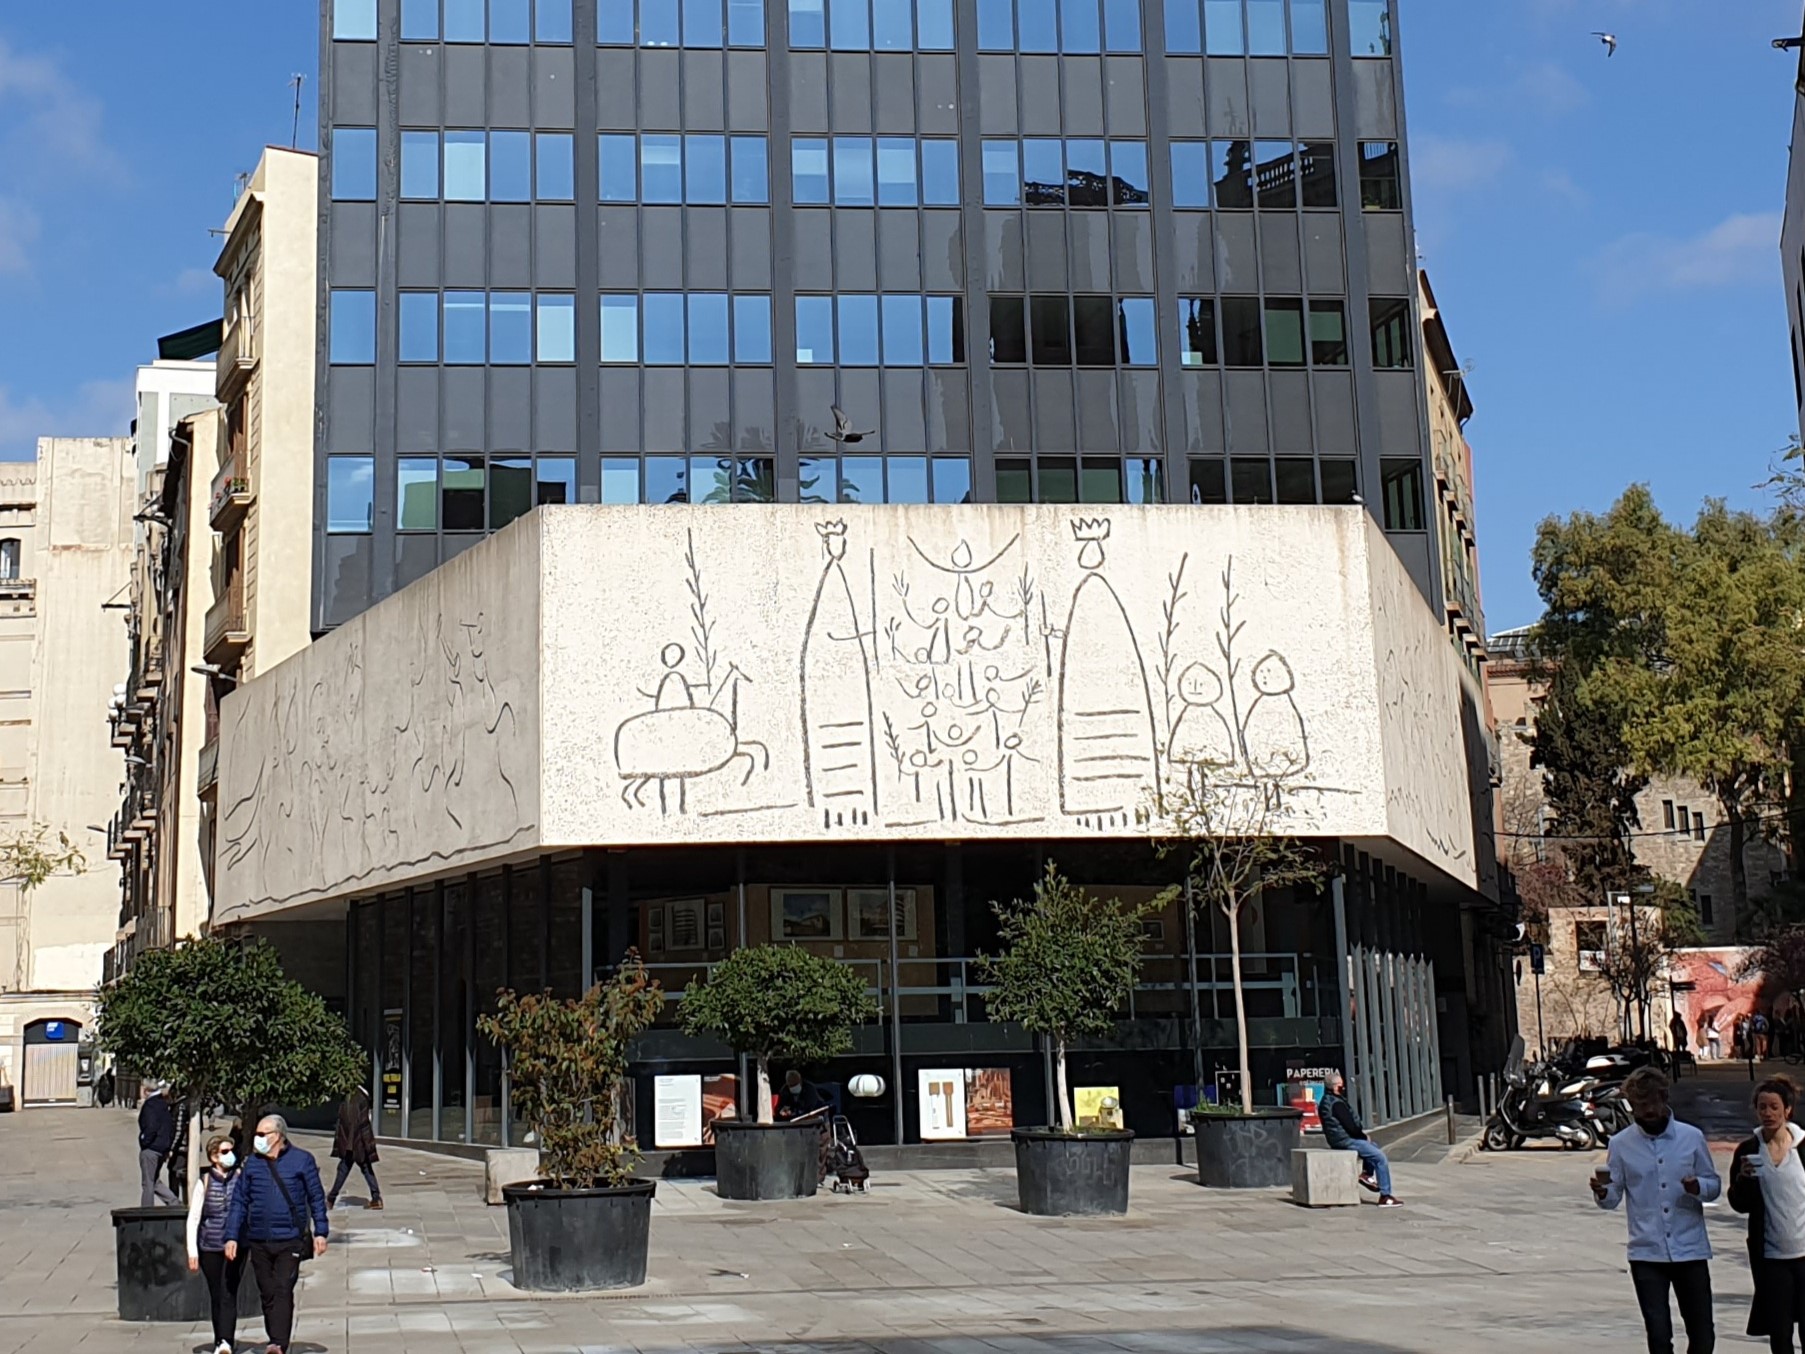 Picasso drawing wall, Barcelona cathedral square.